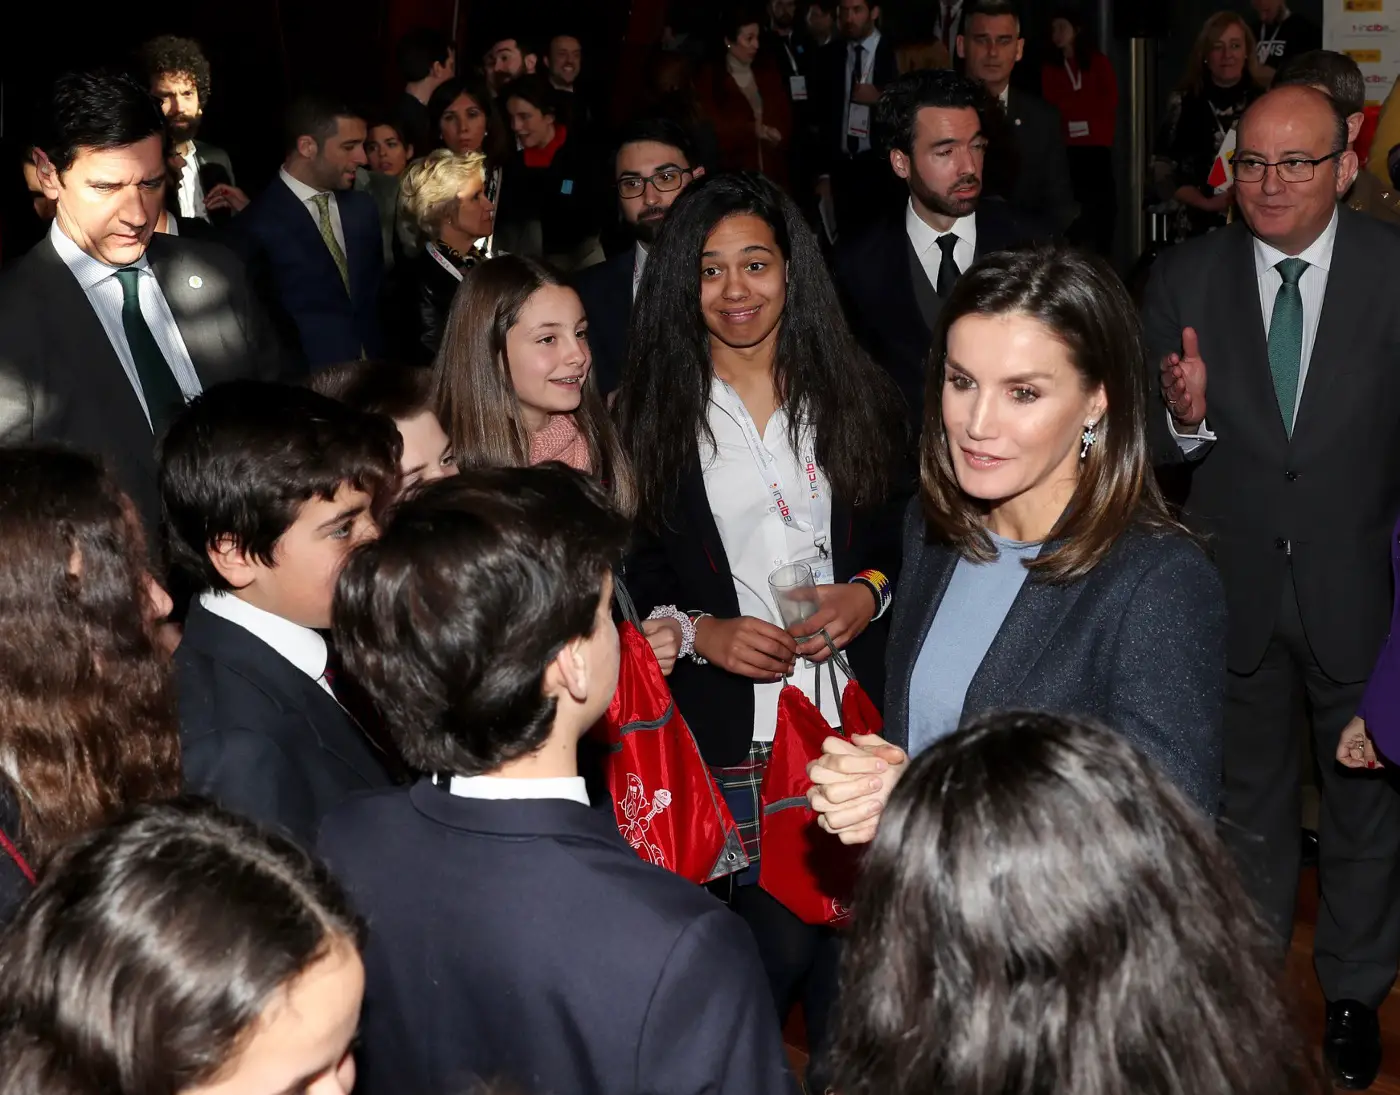 Queen Letizia of Spain looked professionally elegant at the celebration of Secure Internet Day